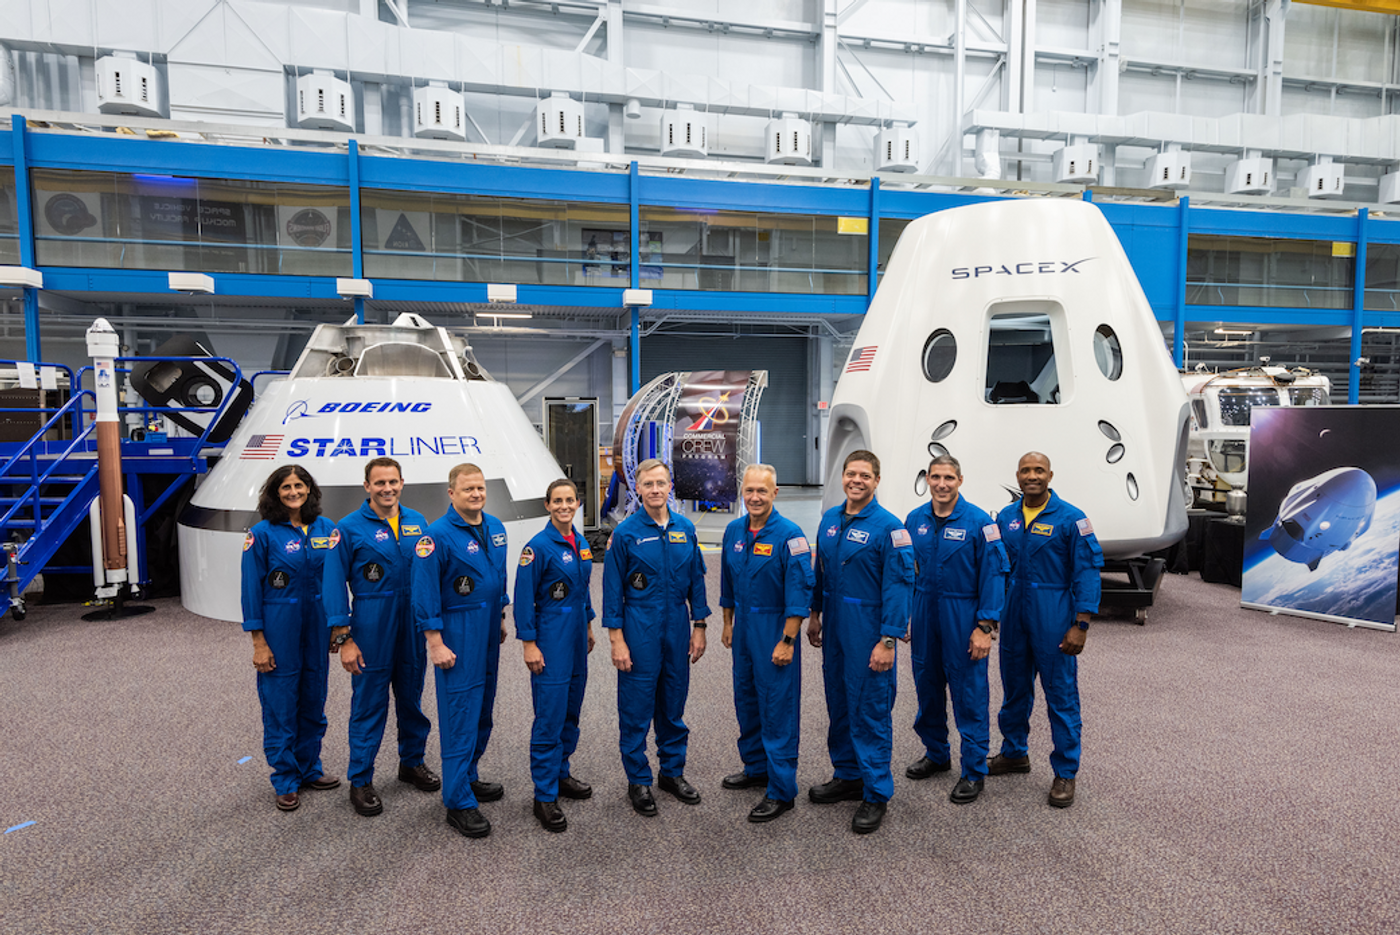 These are the nine men and women NASA selected for the first crewed commercial space missions to be hosted by Boeing and SpaceX.